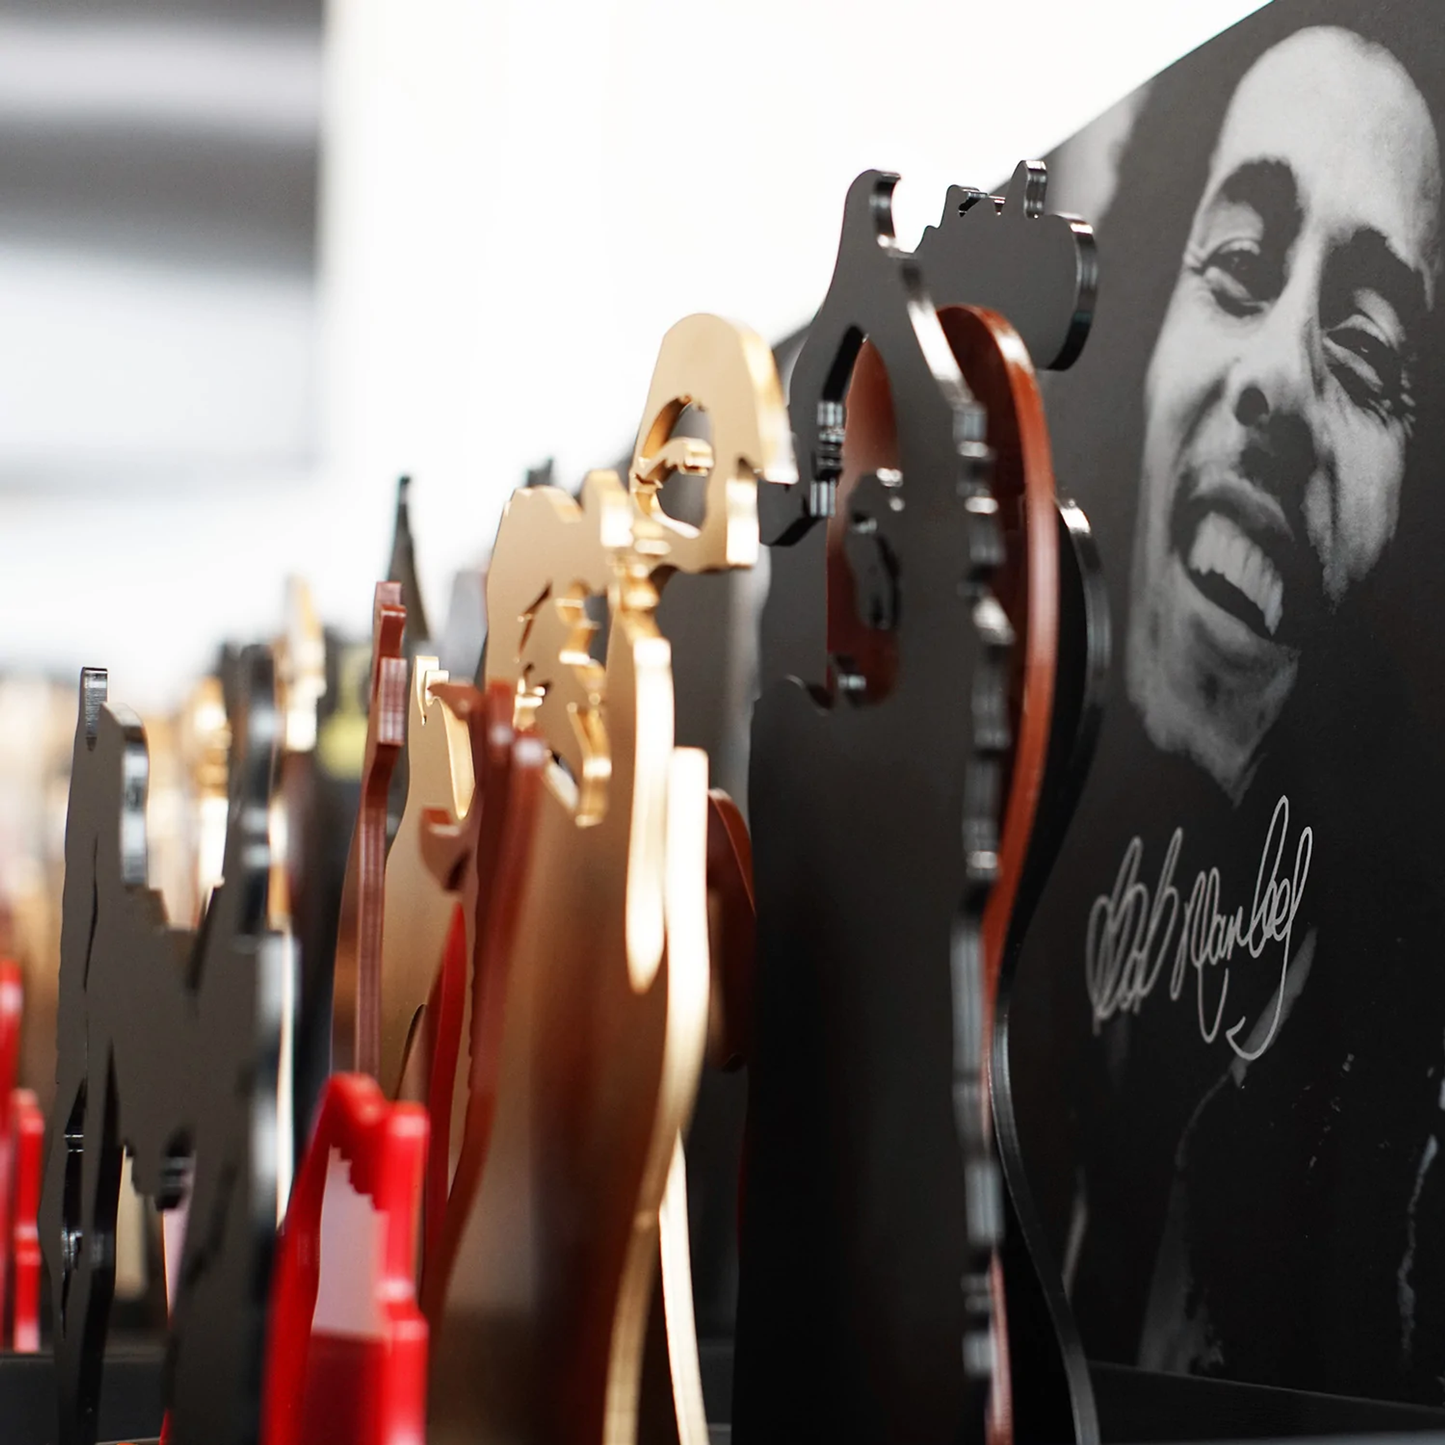 Bob Marley "One Love" Licensed 3D Sculpture, Limited Edition of 500